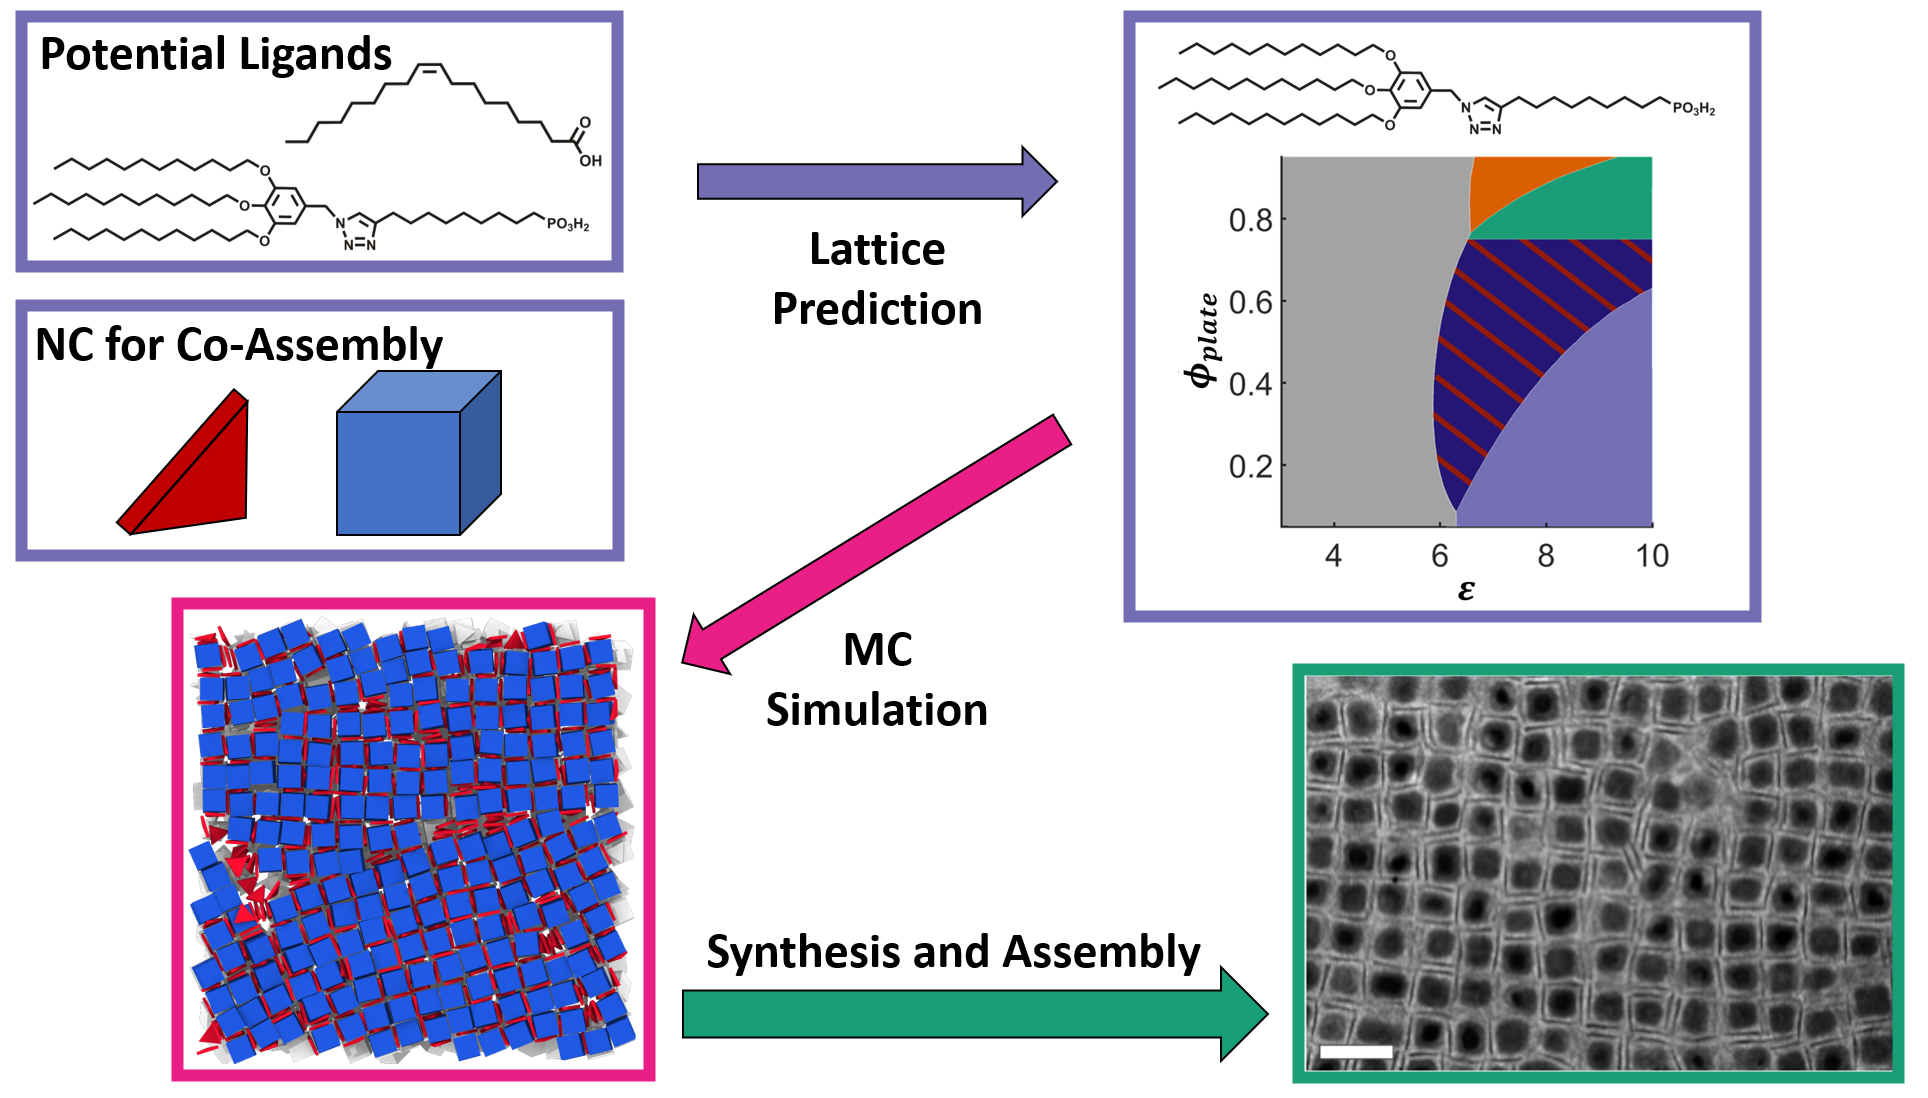 a diagram of potential chemistry ligands and NC co-assembly in the upper lefthand corner, pointing to lattice prediction on the right, then to MC simulation pointing to a picture of red and blue cubes, then to synthesis and assembly with a black and white micrograph of a nanocrystal